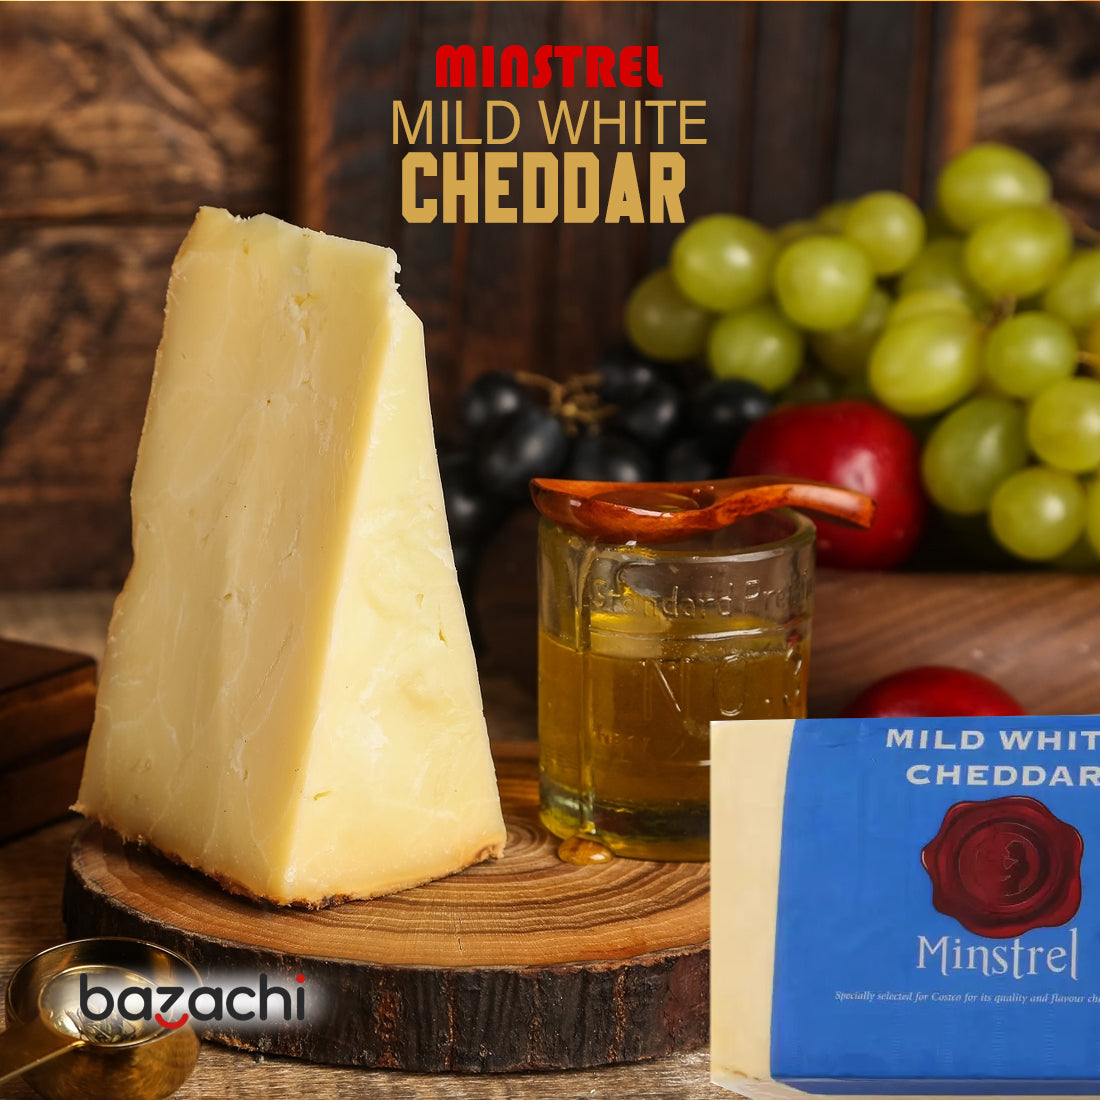 Specially Selected Minstrel Mild White Cheddar